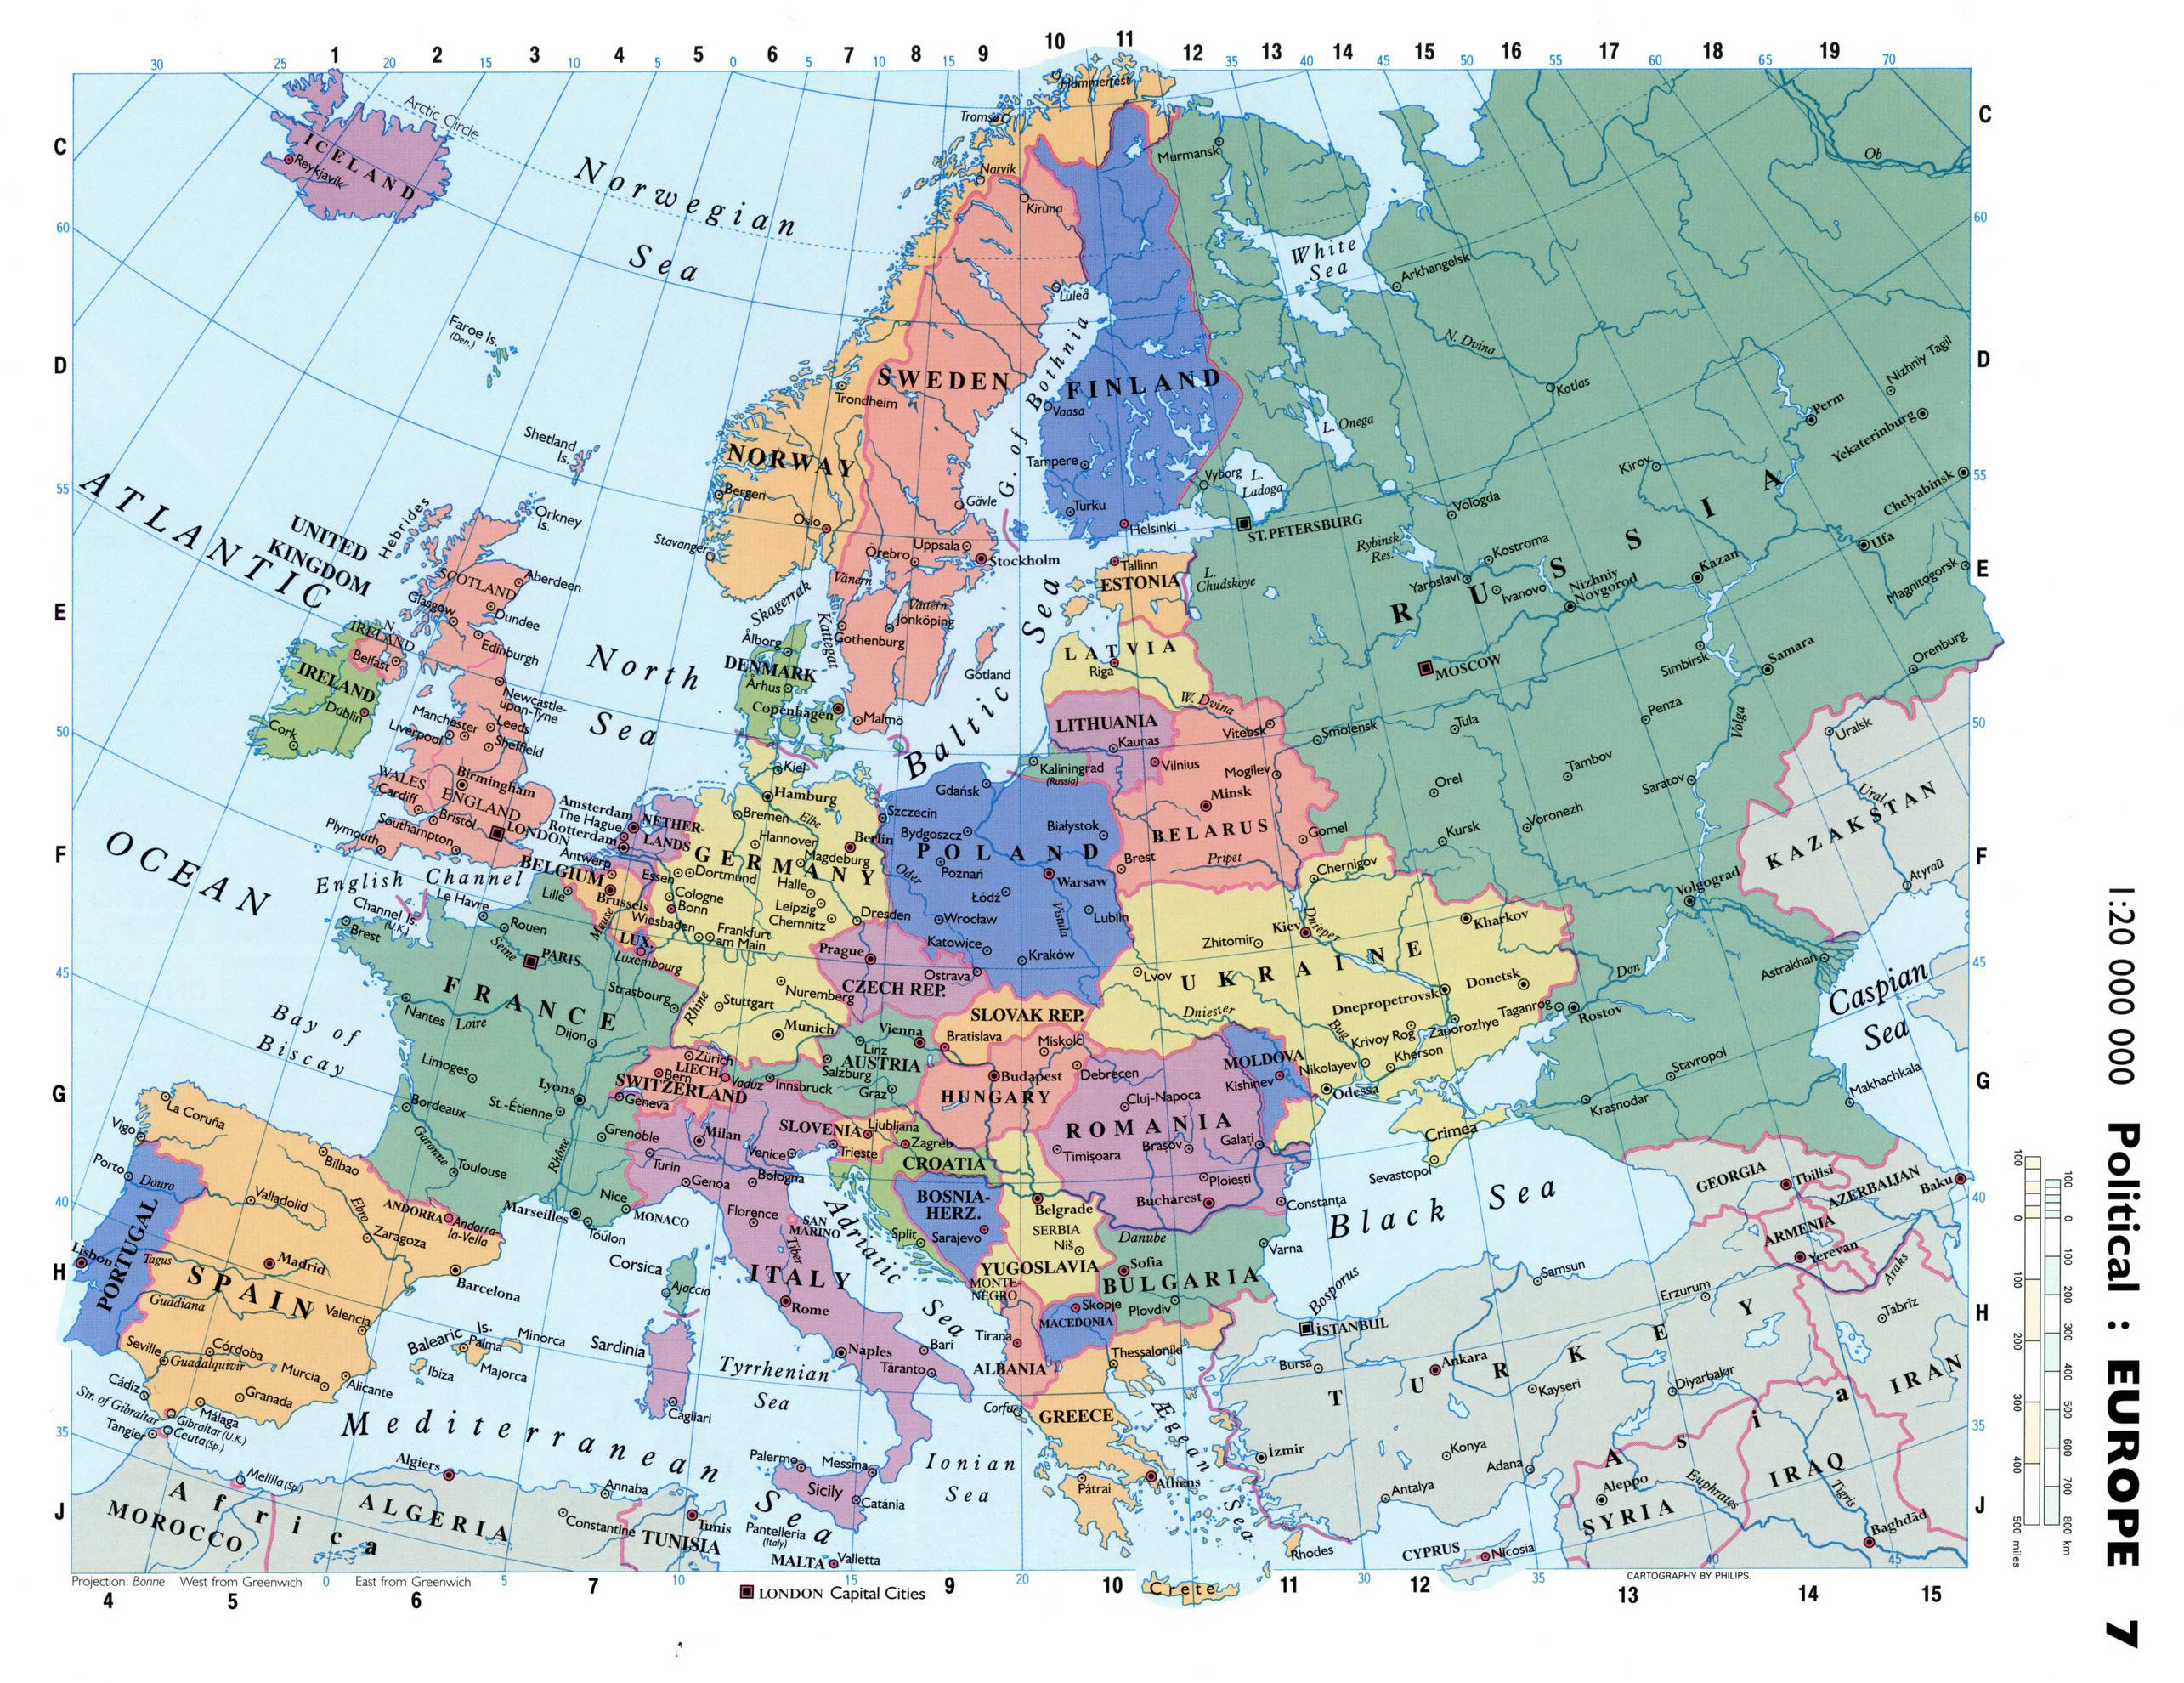 detailed-political-map-of-europe-with-capitals-and-major-cities.jpg